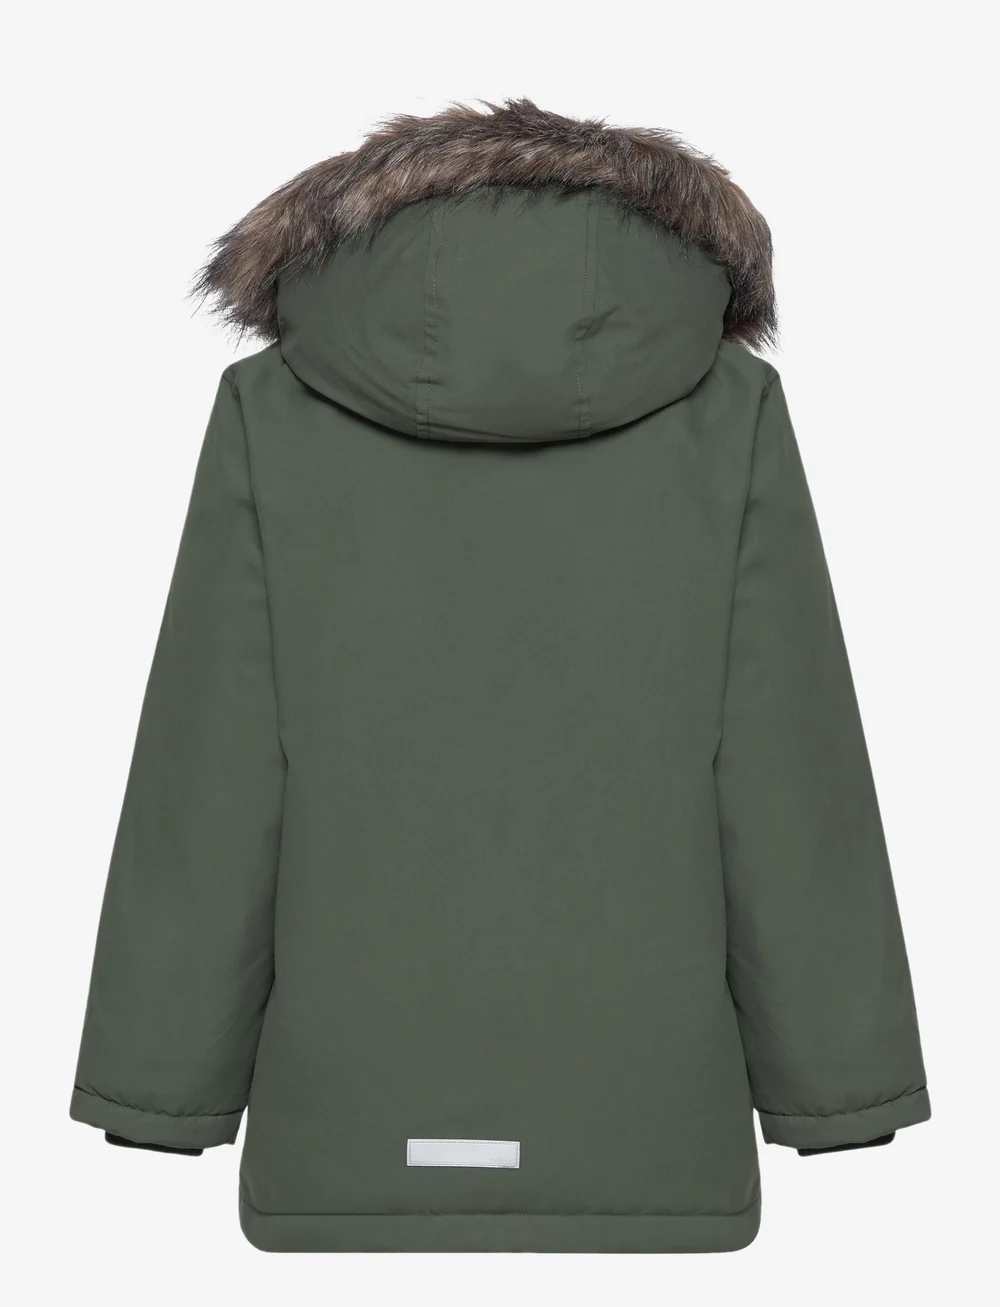 name it Nkmmarlin Parka Jacket Pb Fo - 27.50 €. Buy Parkas from name it  online at Boozt.com. Fast delivery and easy returns